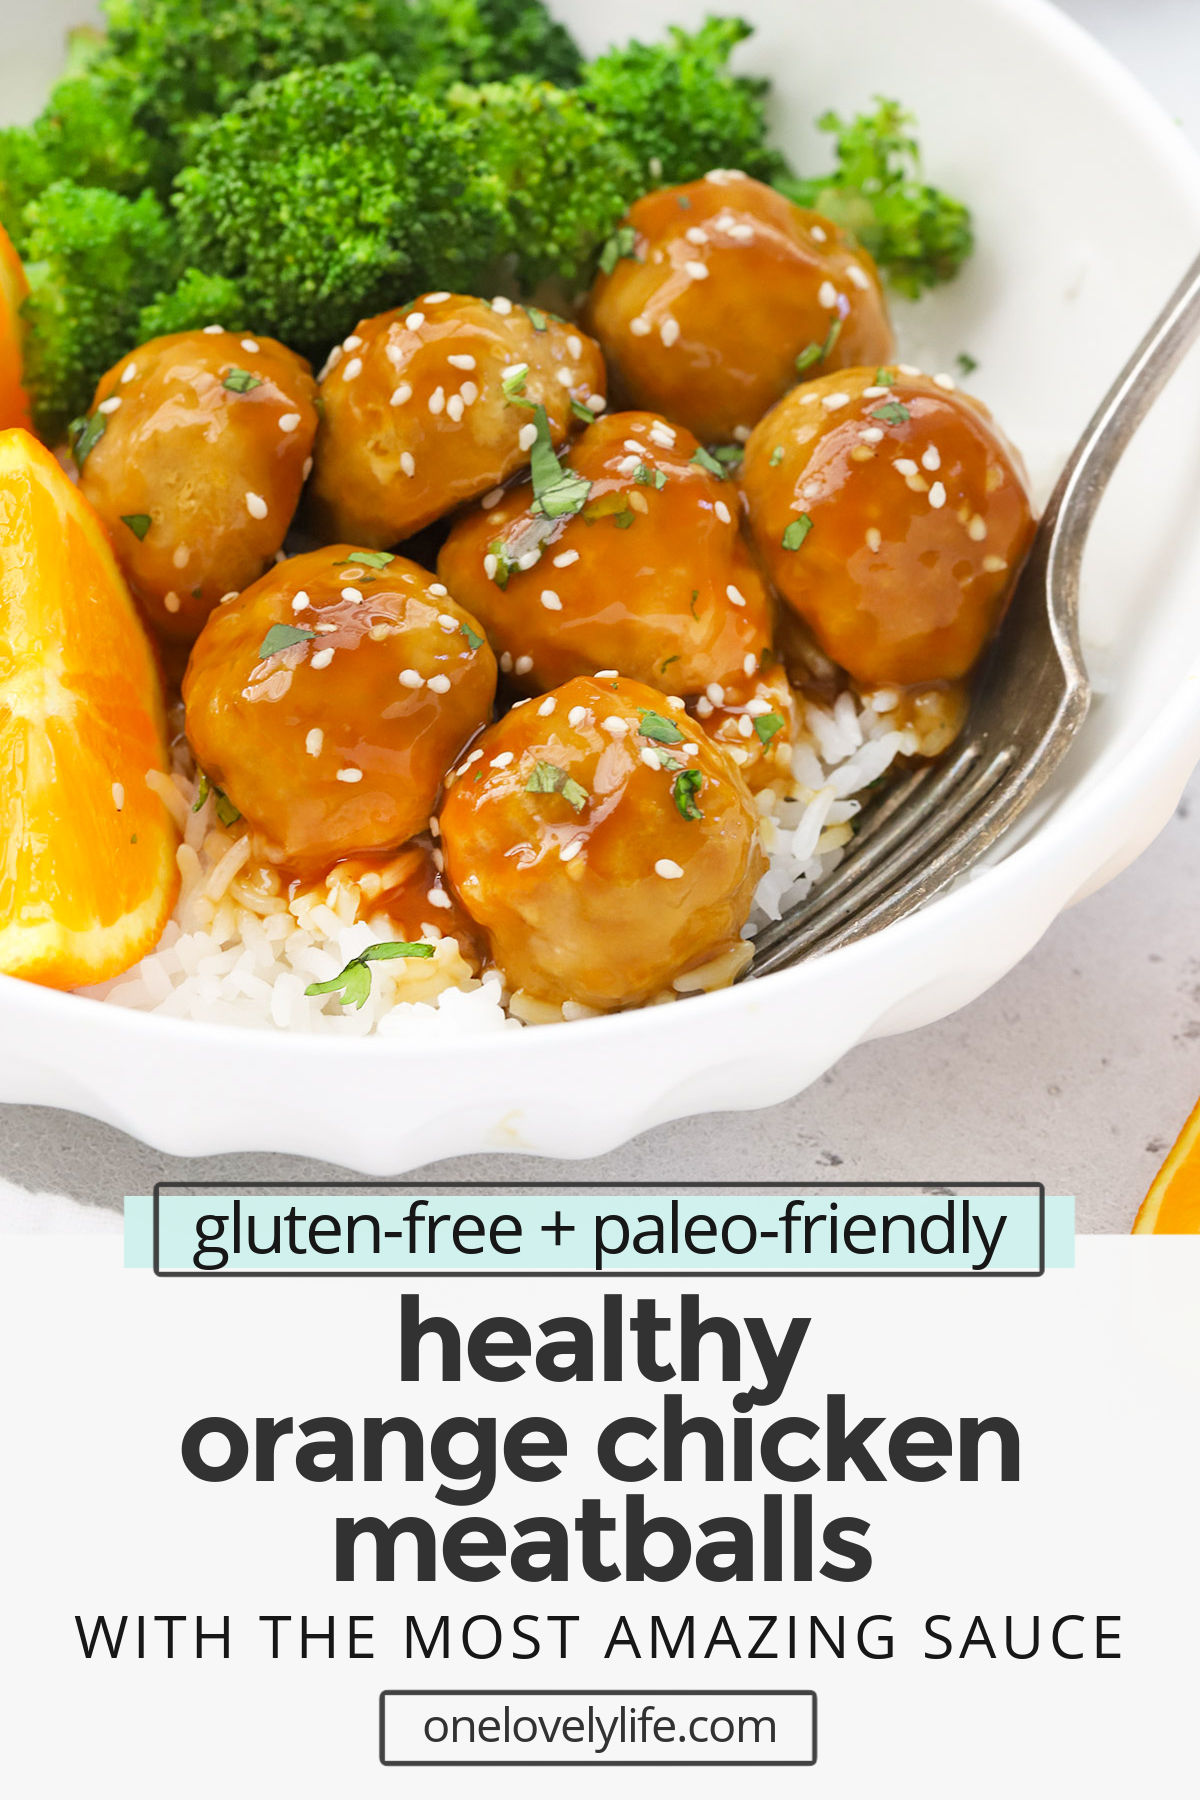 Healthy Orange Chicken Meatballs - These yummy gluten-free chicken meatballs are smothered in our sweet and tangy orange stir-fry sauce to make a delicious dinner! (Paleo-Friendly) // Paleo Orange Chicken Meatballs Recipe // Sauce For Orange Chicken // Glazed Orange Chicken Meatballs //